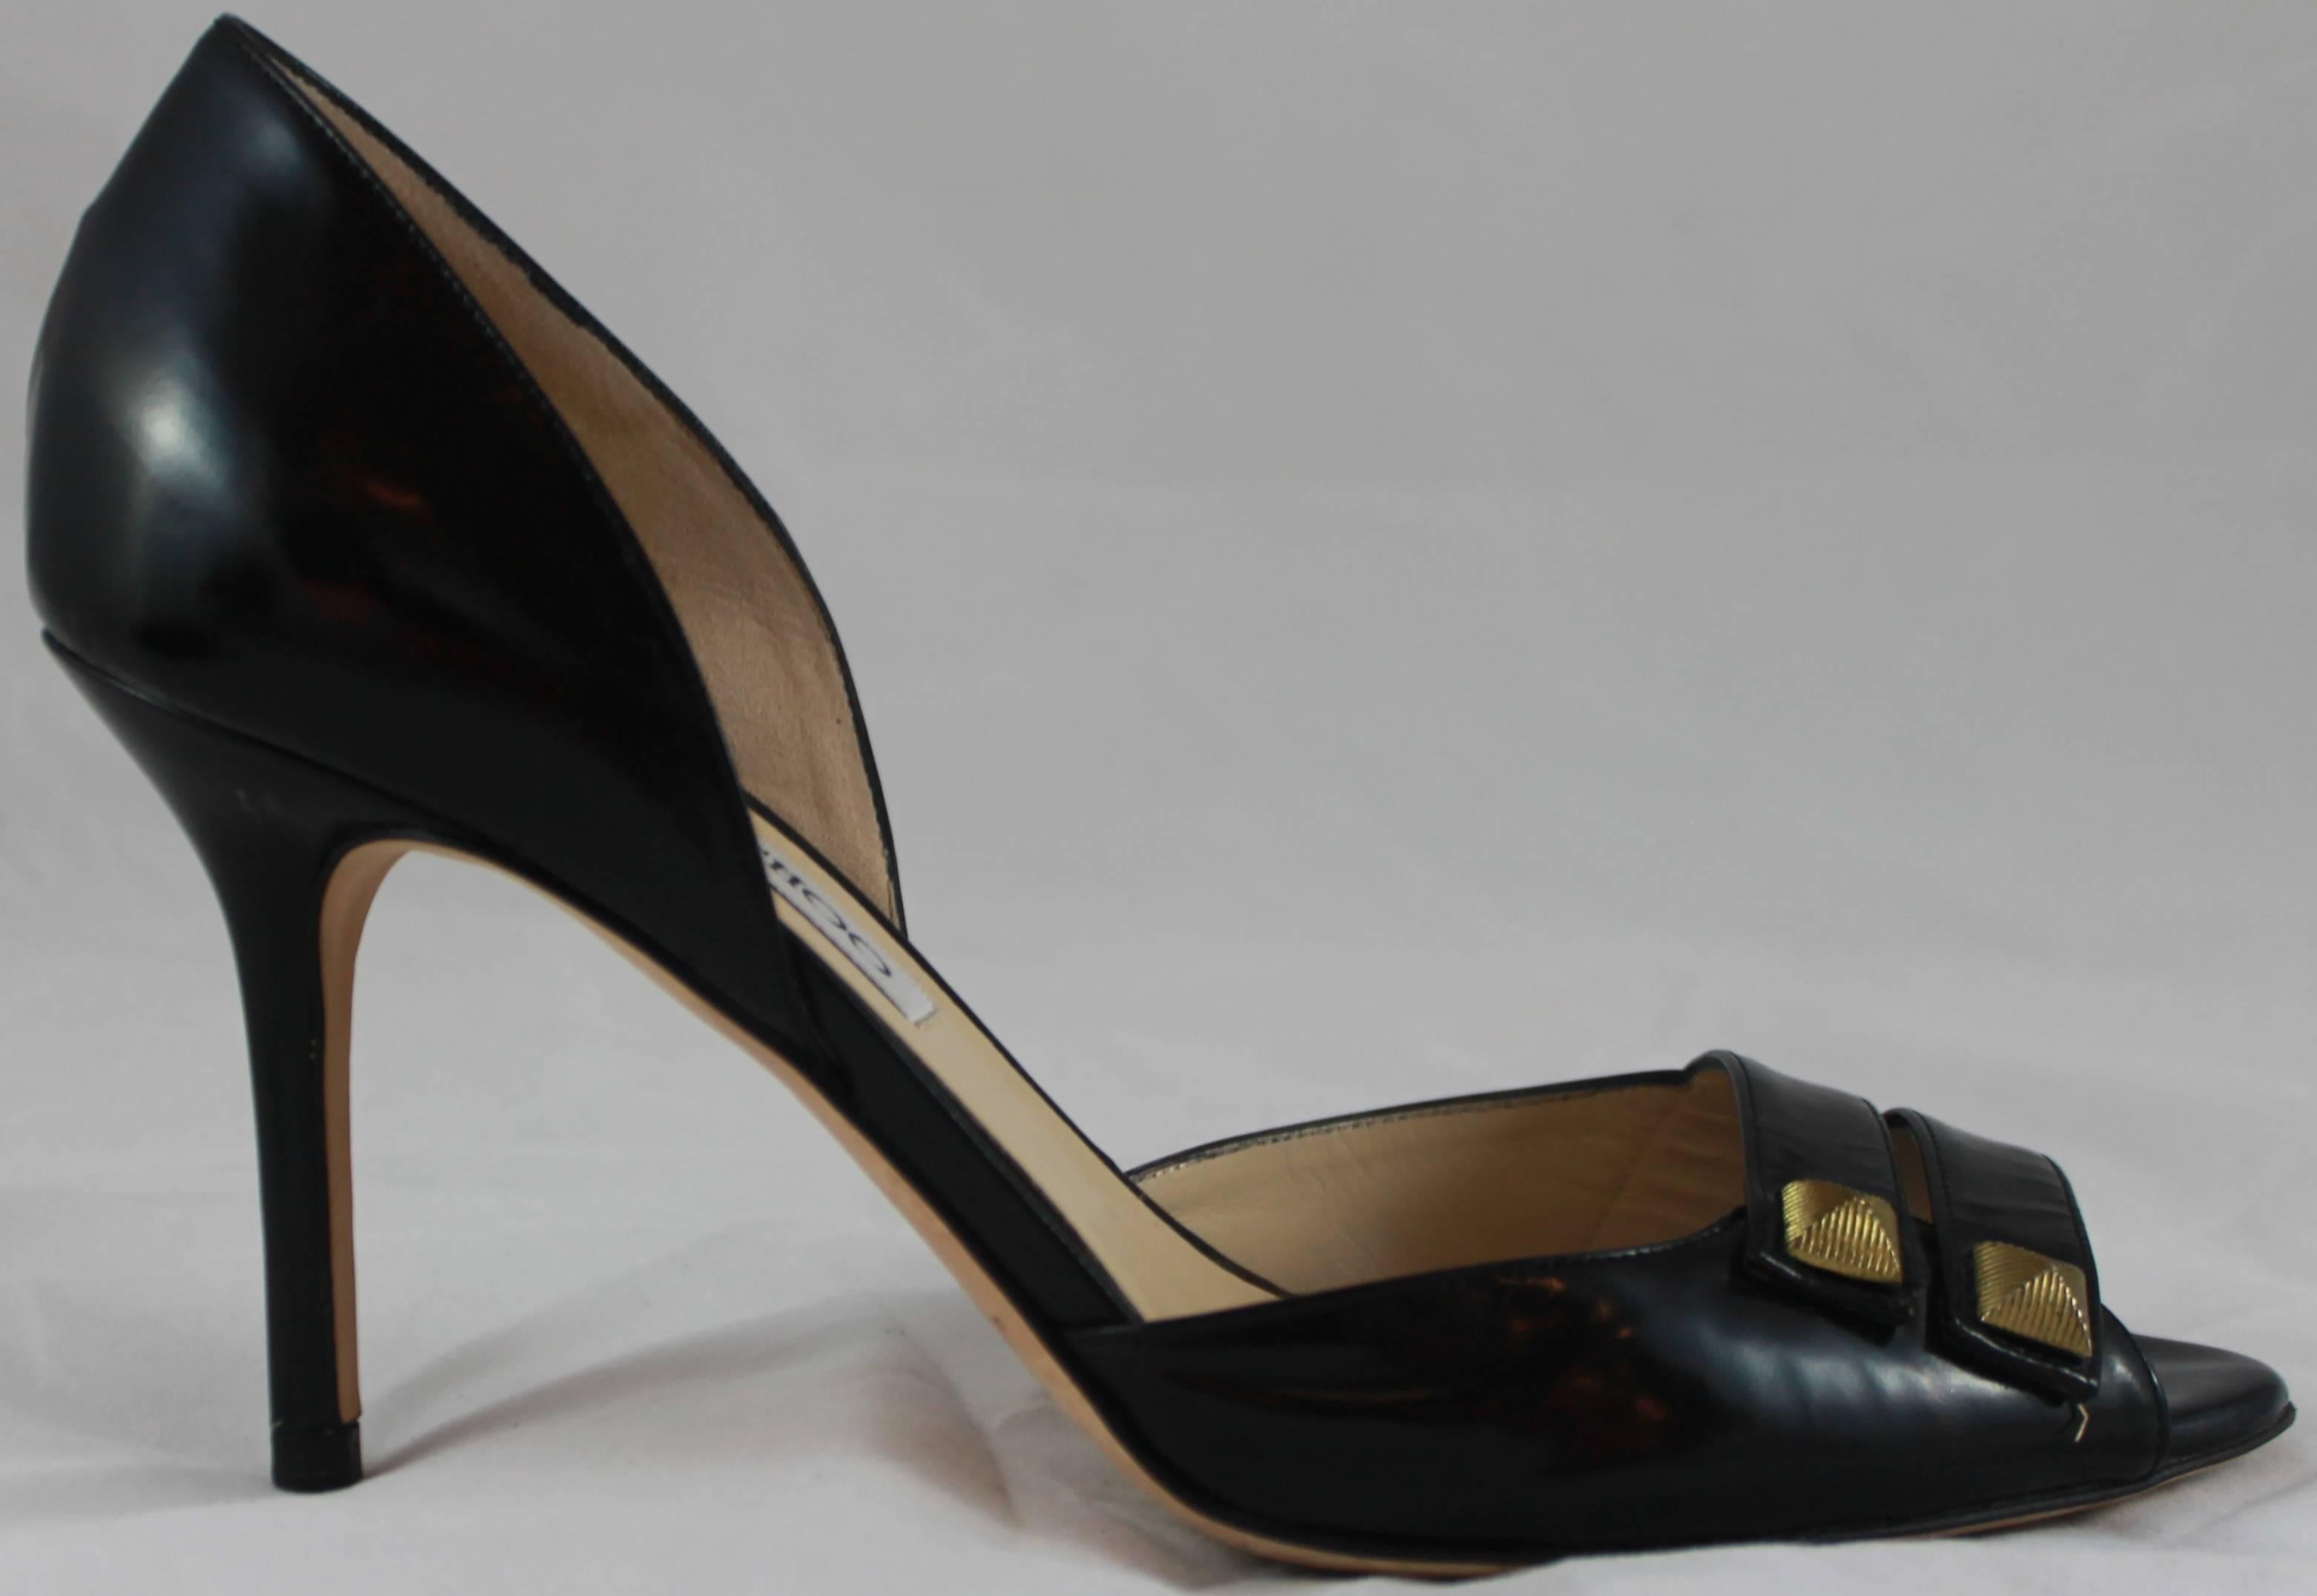 Jimmy Choo Black Leather D'Orsay Heels with Double Straps and Gold Studs - 36.5. These d'orsay heels have an open toe and 2 straps with gold etched studs. A duster comes with them. They are in excellent condition with some bottom wear.